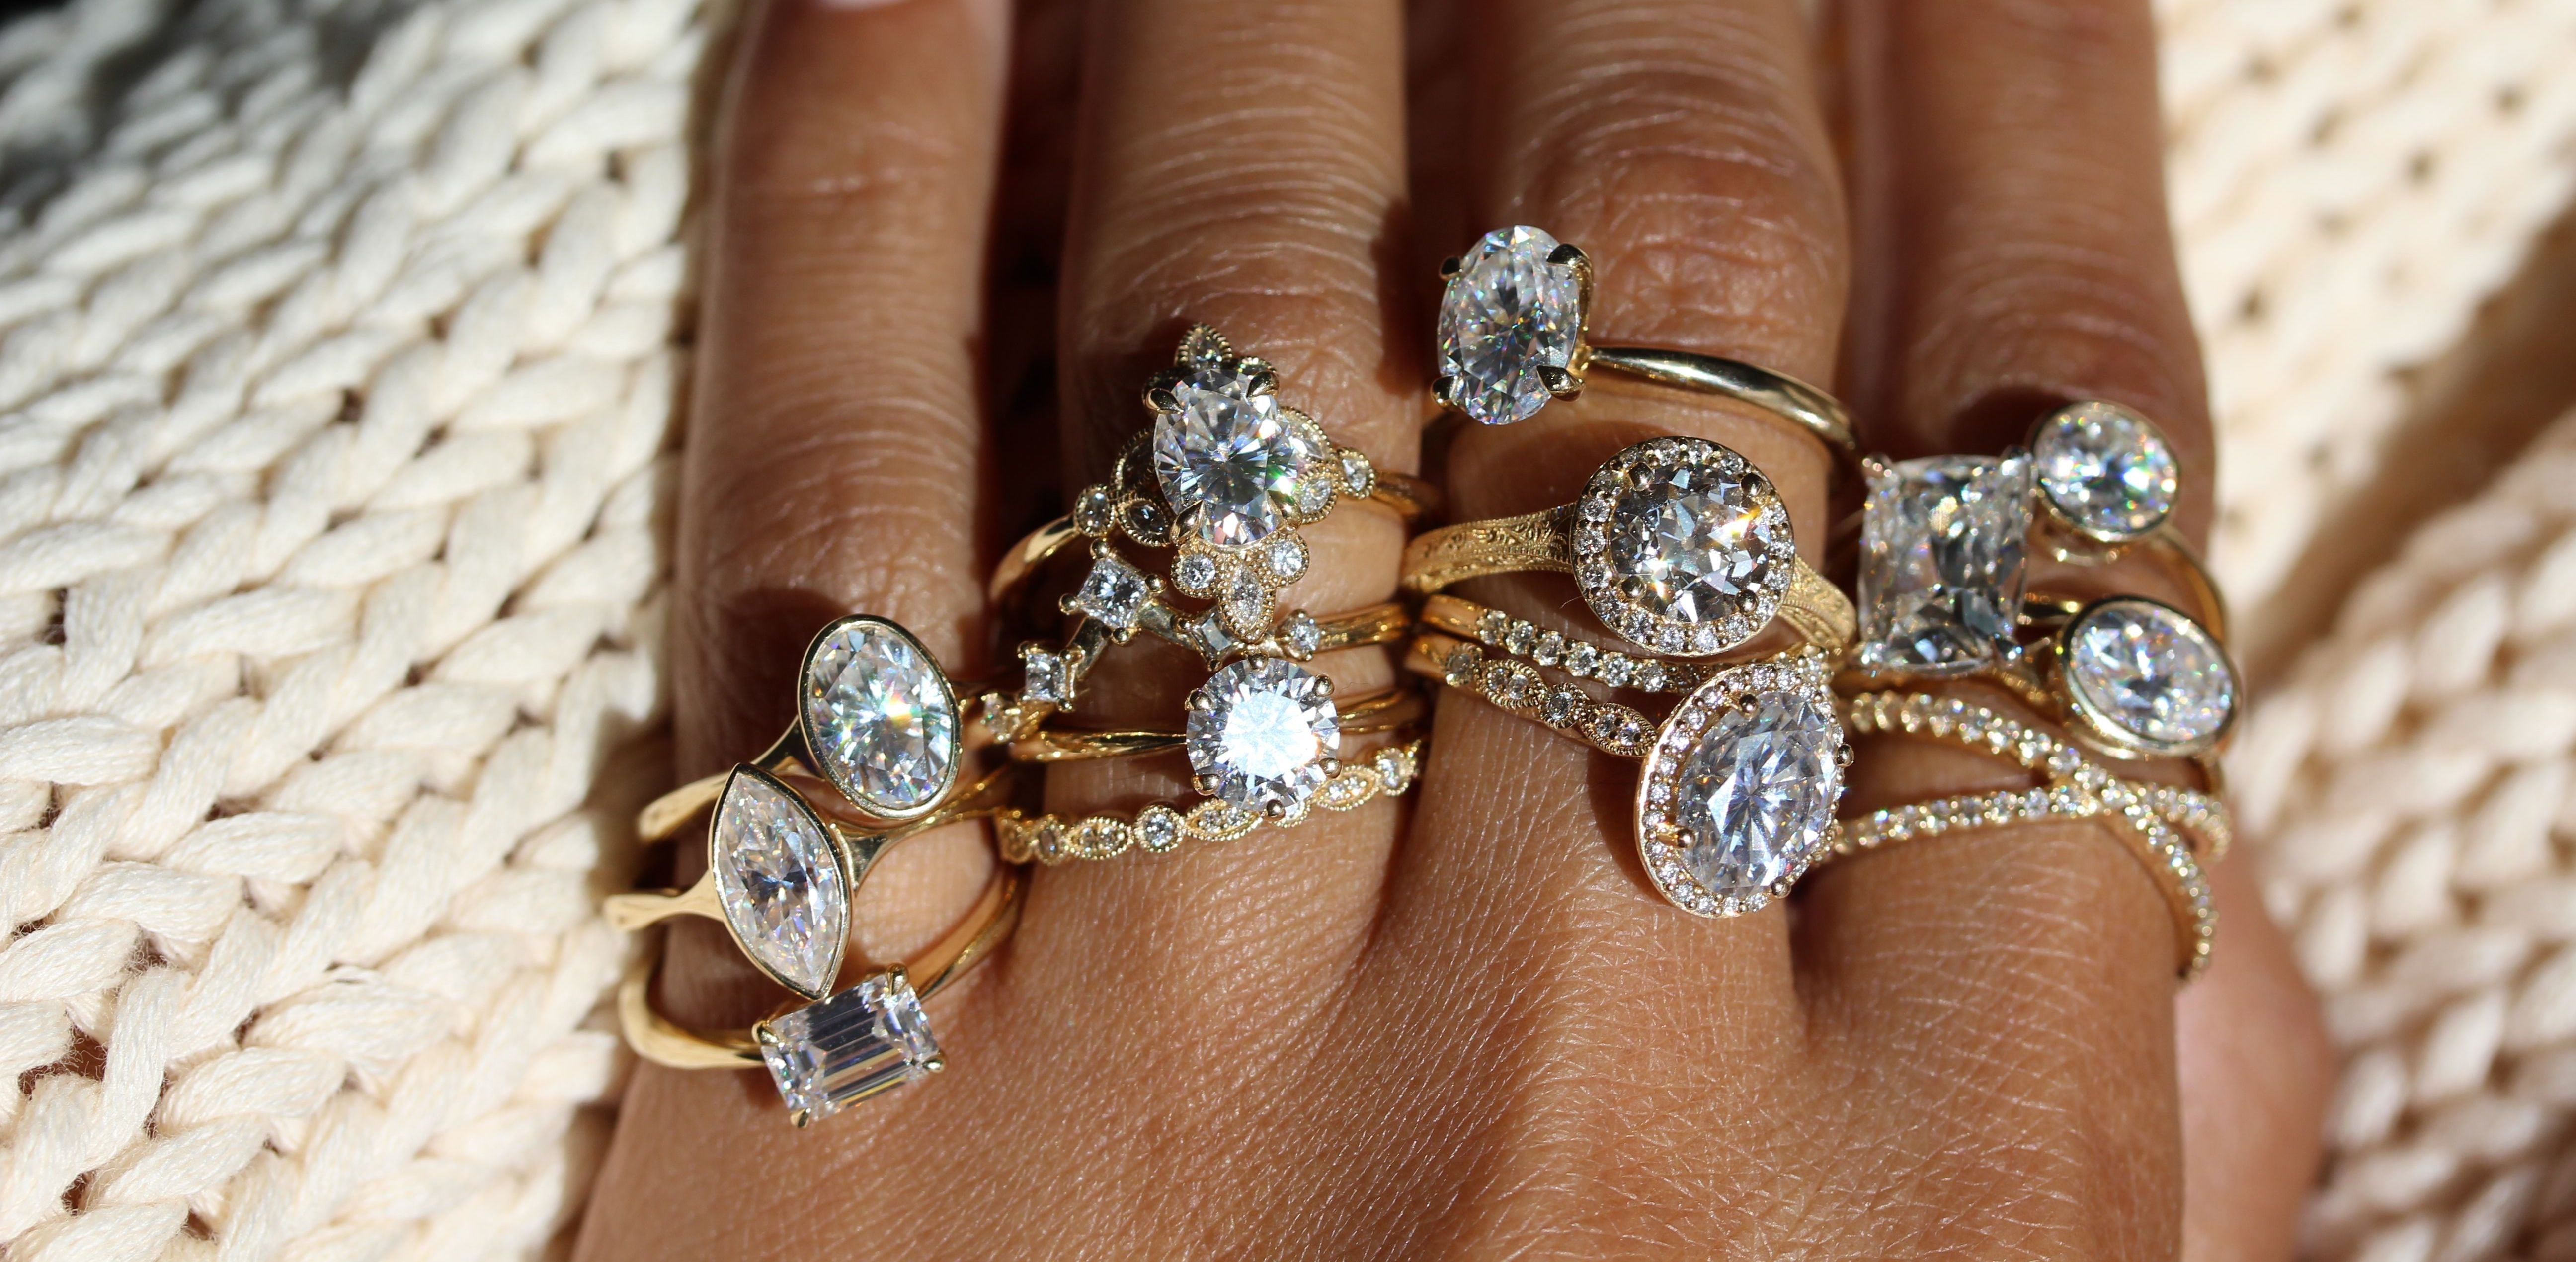 How To Choose The Best Diamond Shape And Setting For Your Hand | Ritani